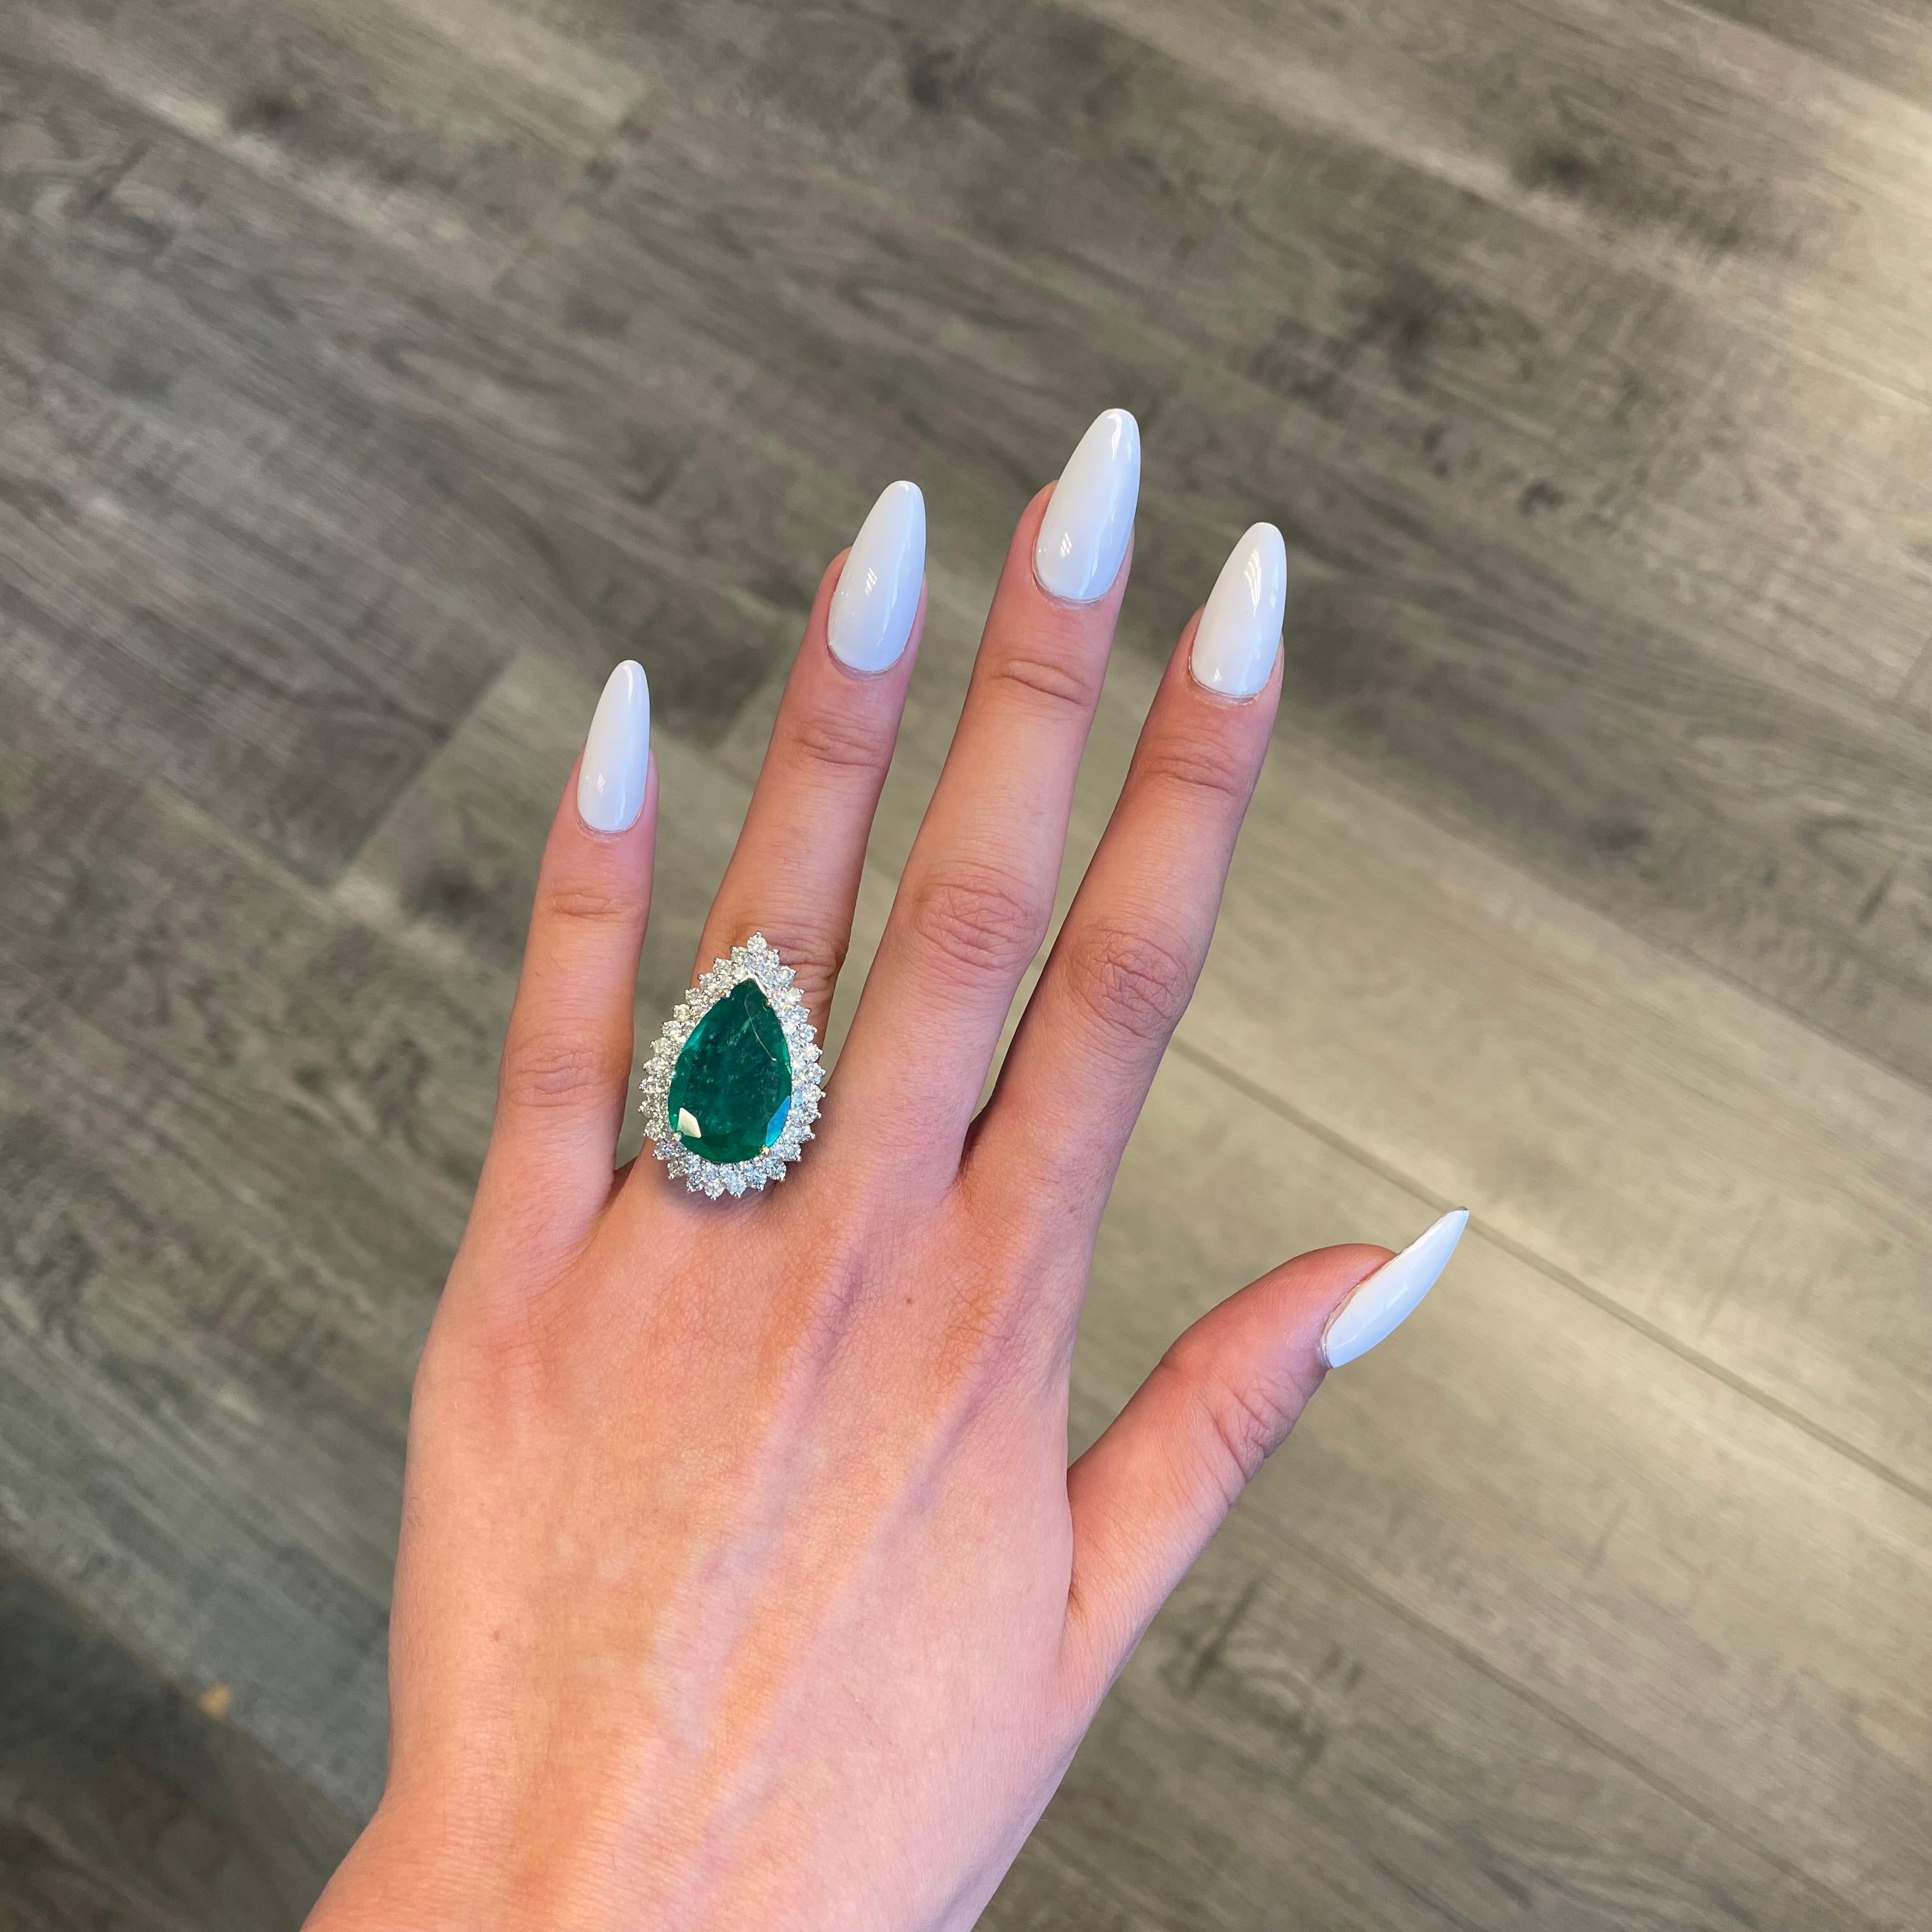 Lovely emerald with diamond double halo ring.
8.11 carat pear emerald apx F2 complimented with 59 round brilliant diamonds, 2.21ct. Approximately I/J color and SI clarity. 10.32ct total gemstone weight, in 18k white gold. 
Accommodated with an up to